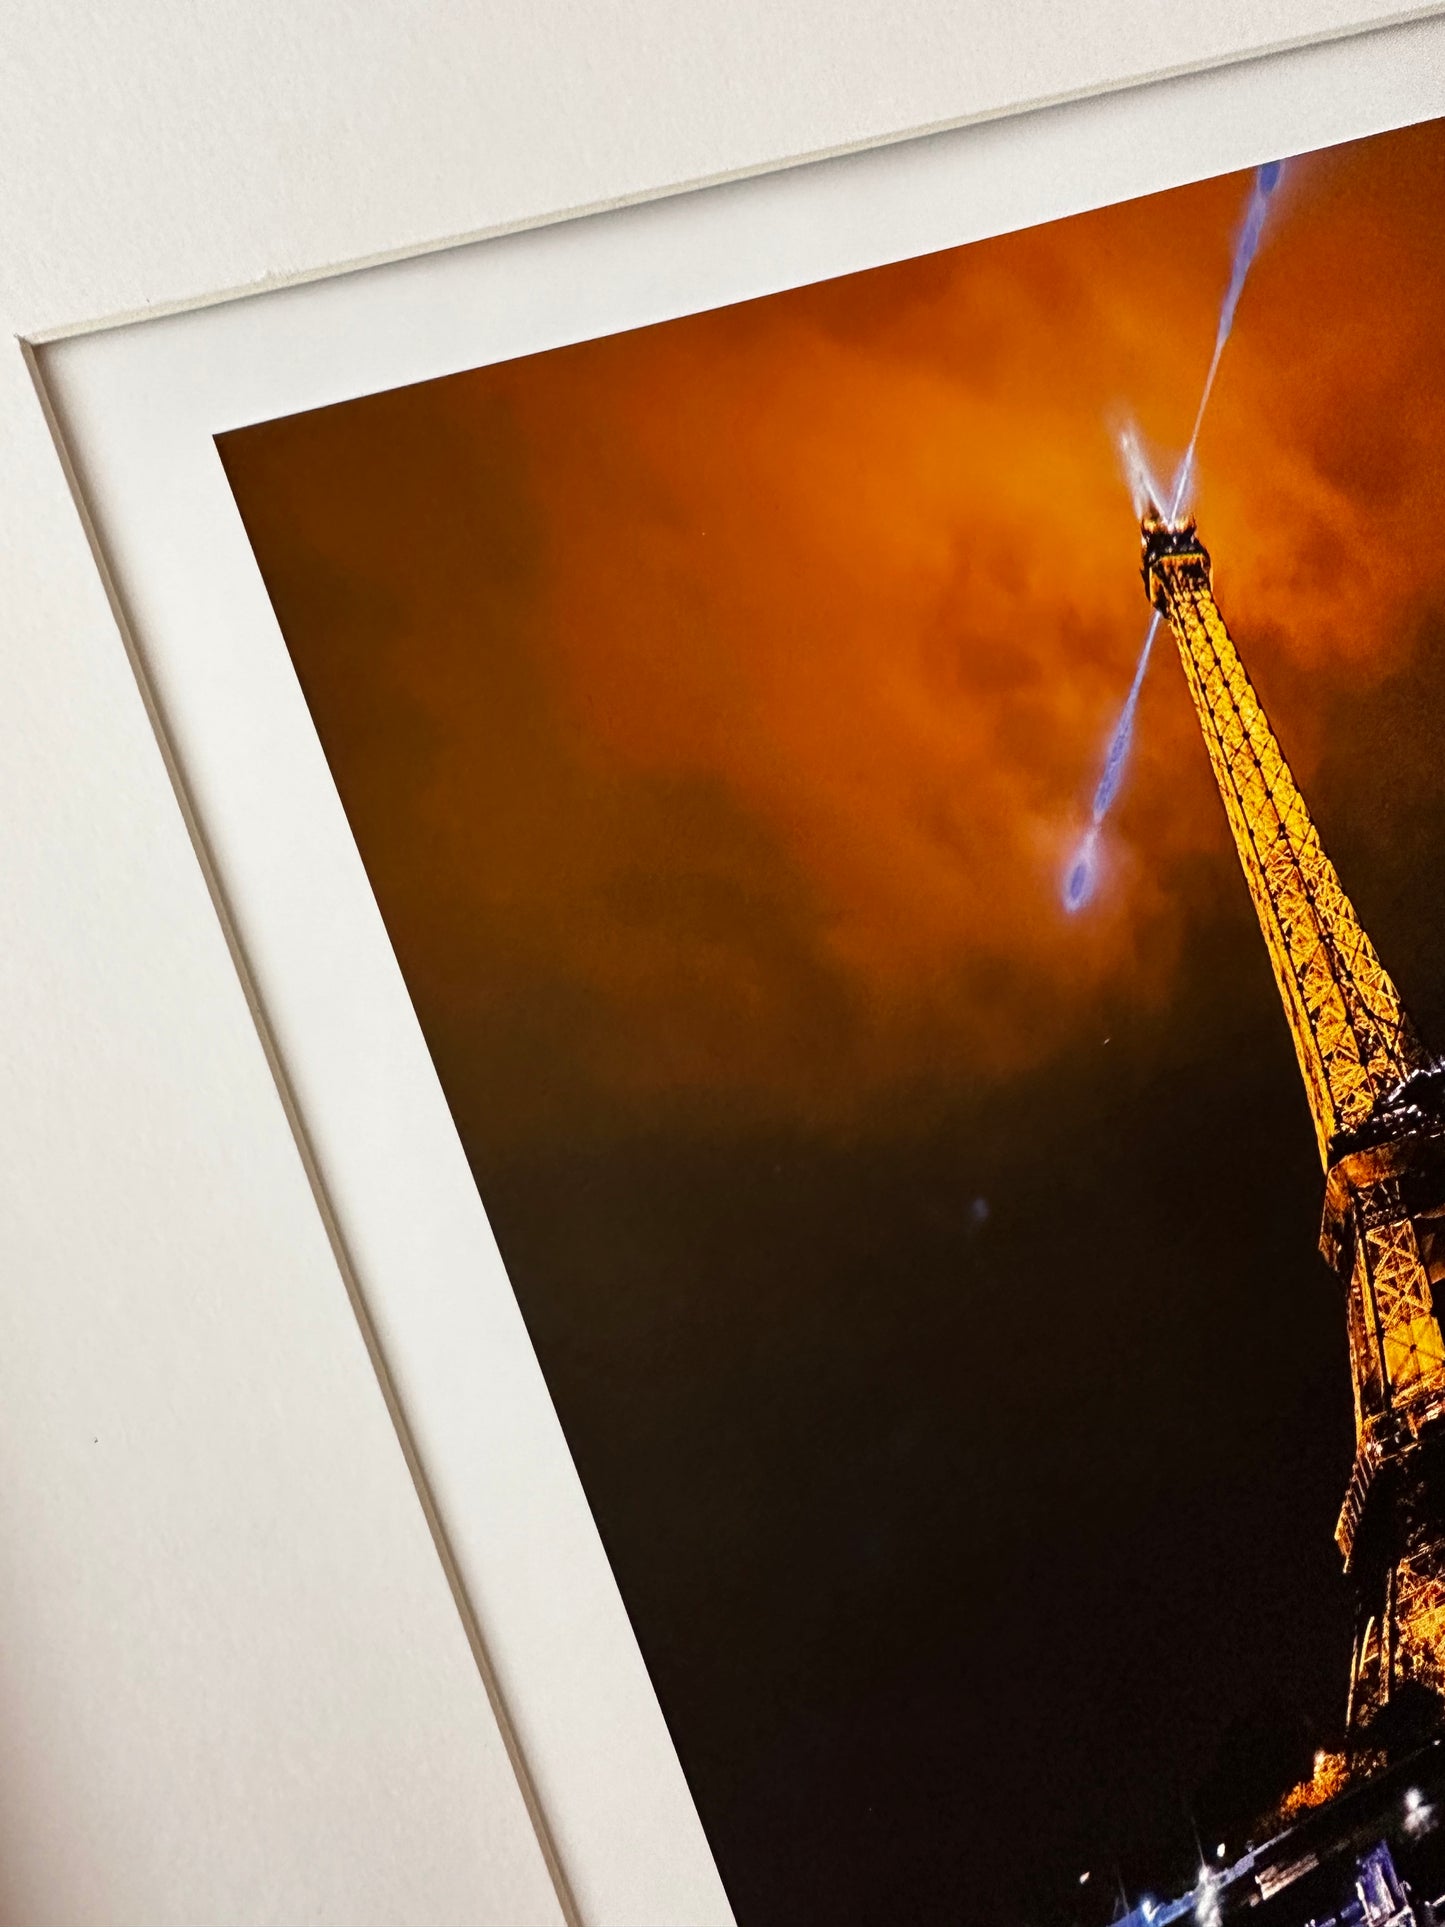 Eiffel Tower At Night Poster